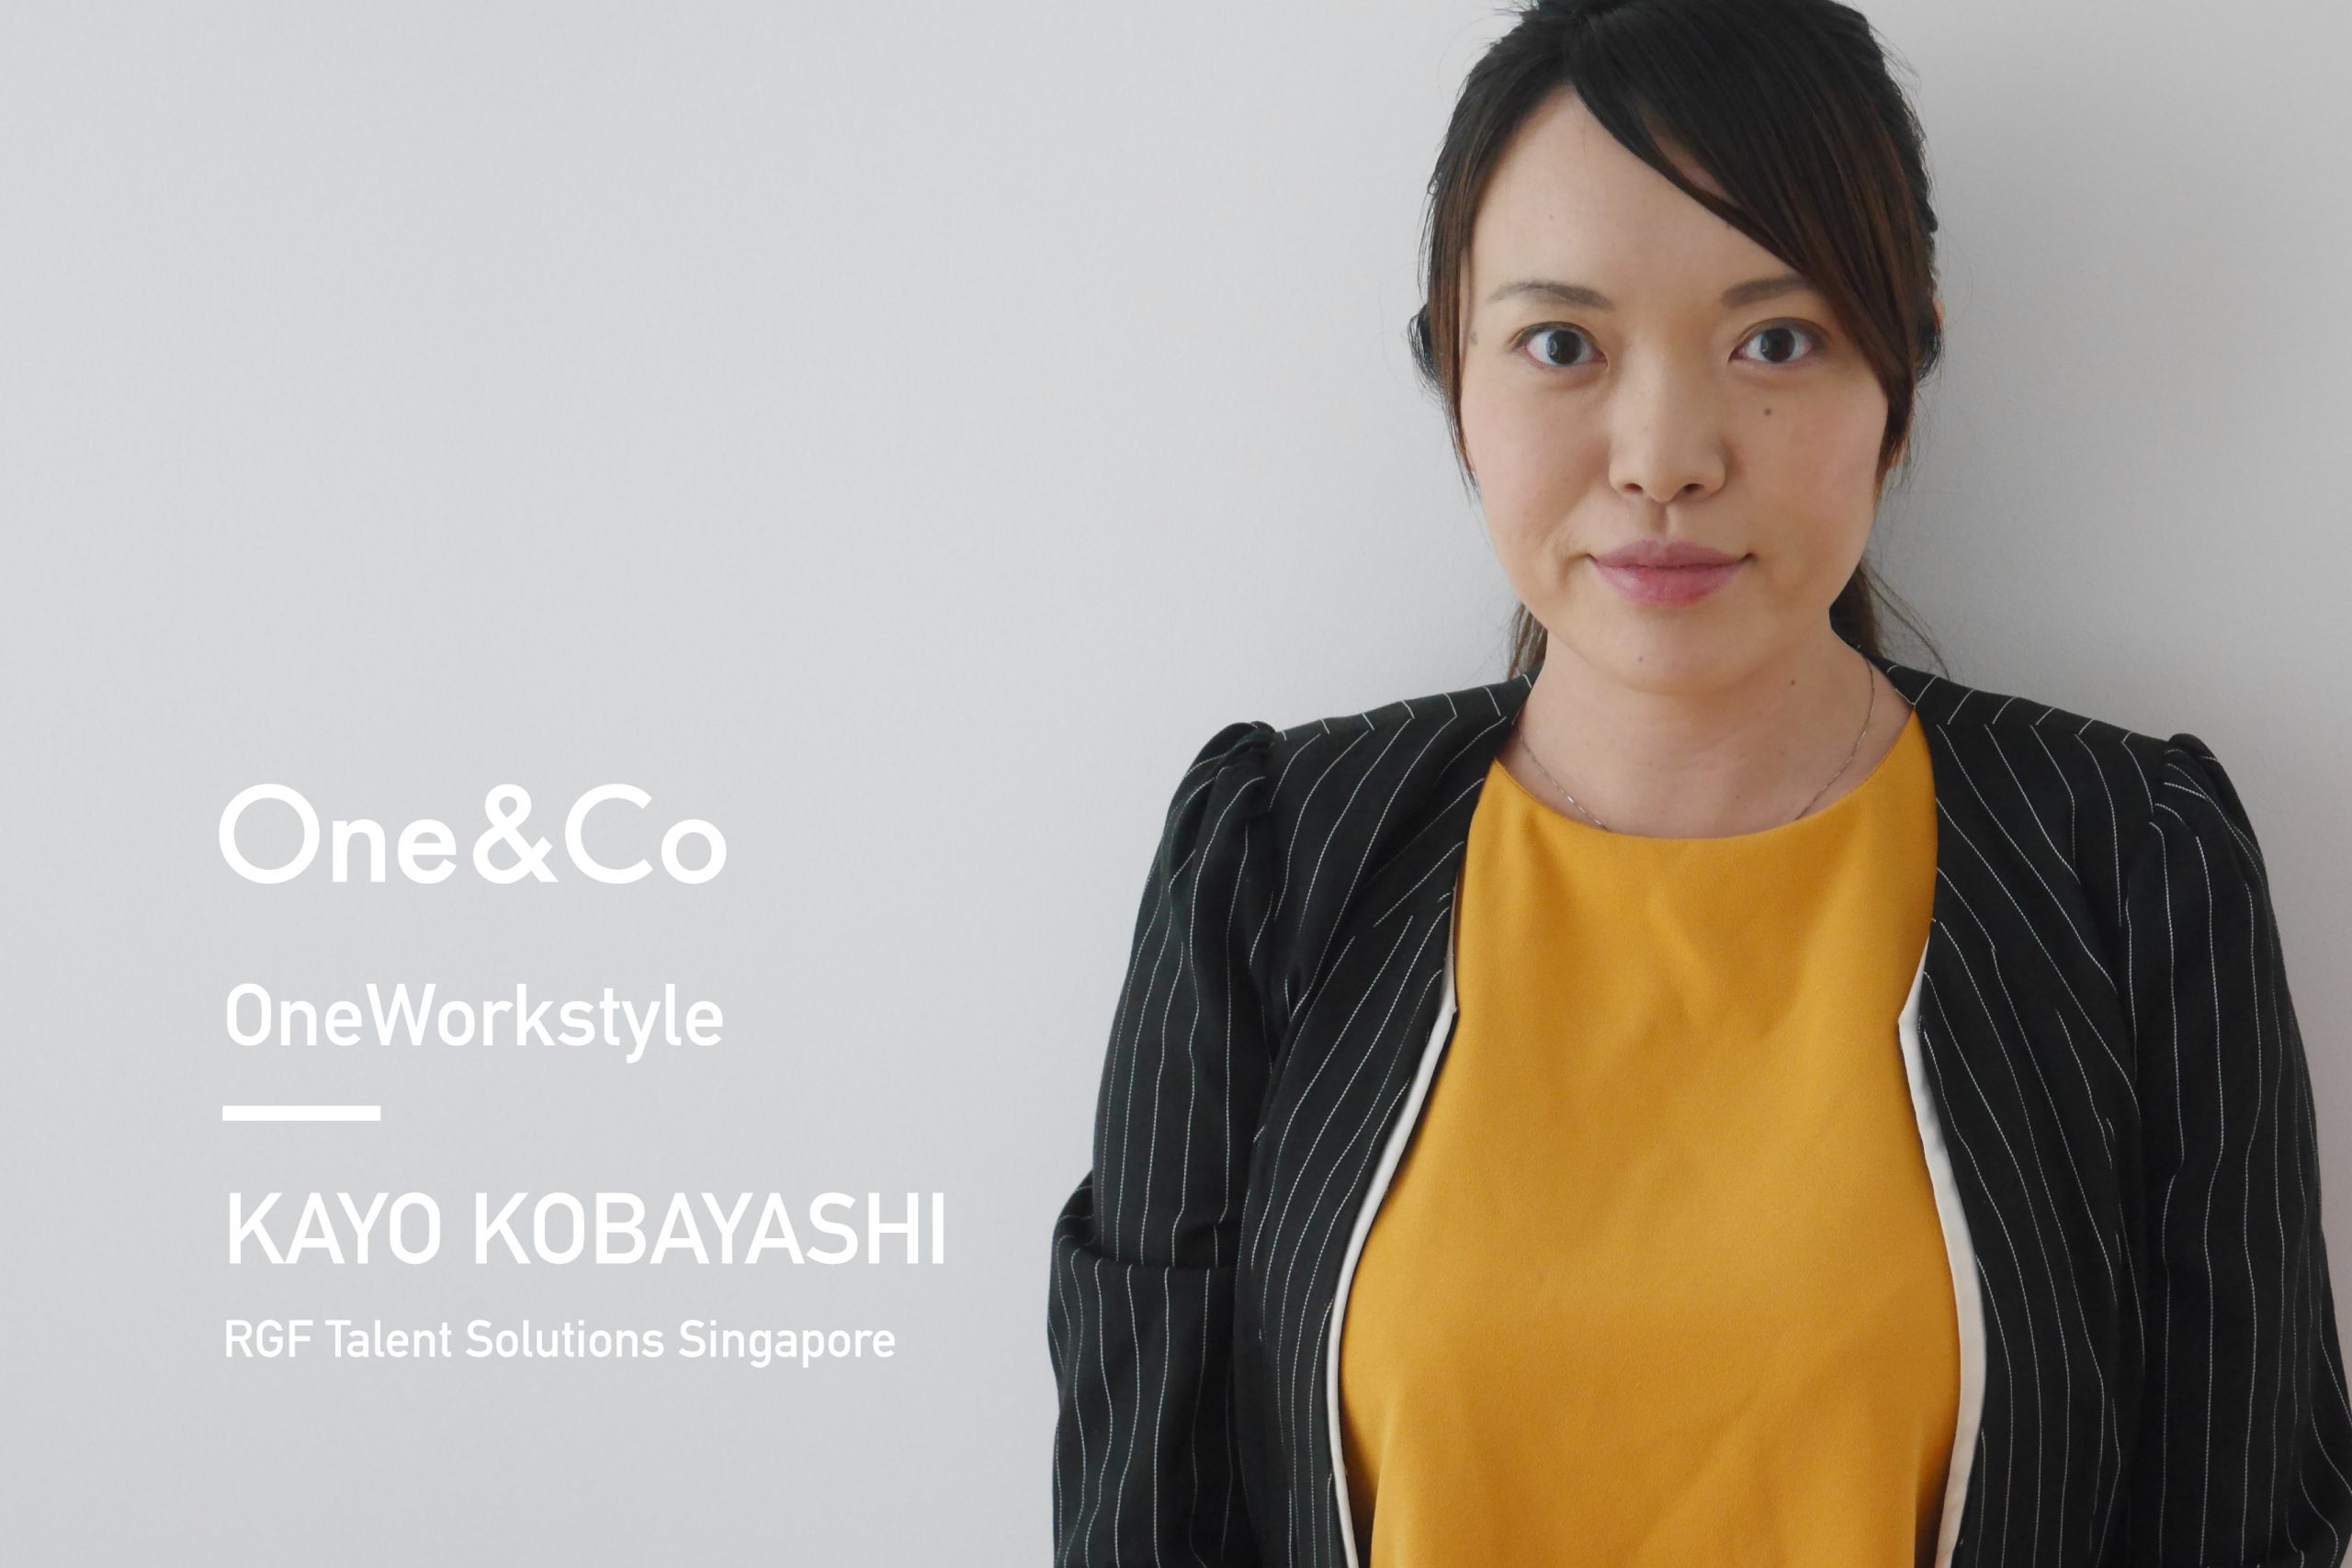 One Co Oneworkstyle コロナ後の 新たな働き方を探る 10 小林佳代さん